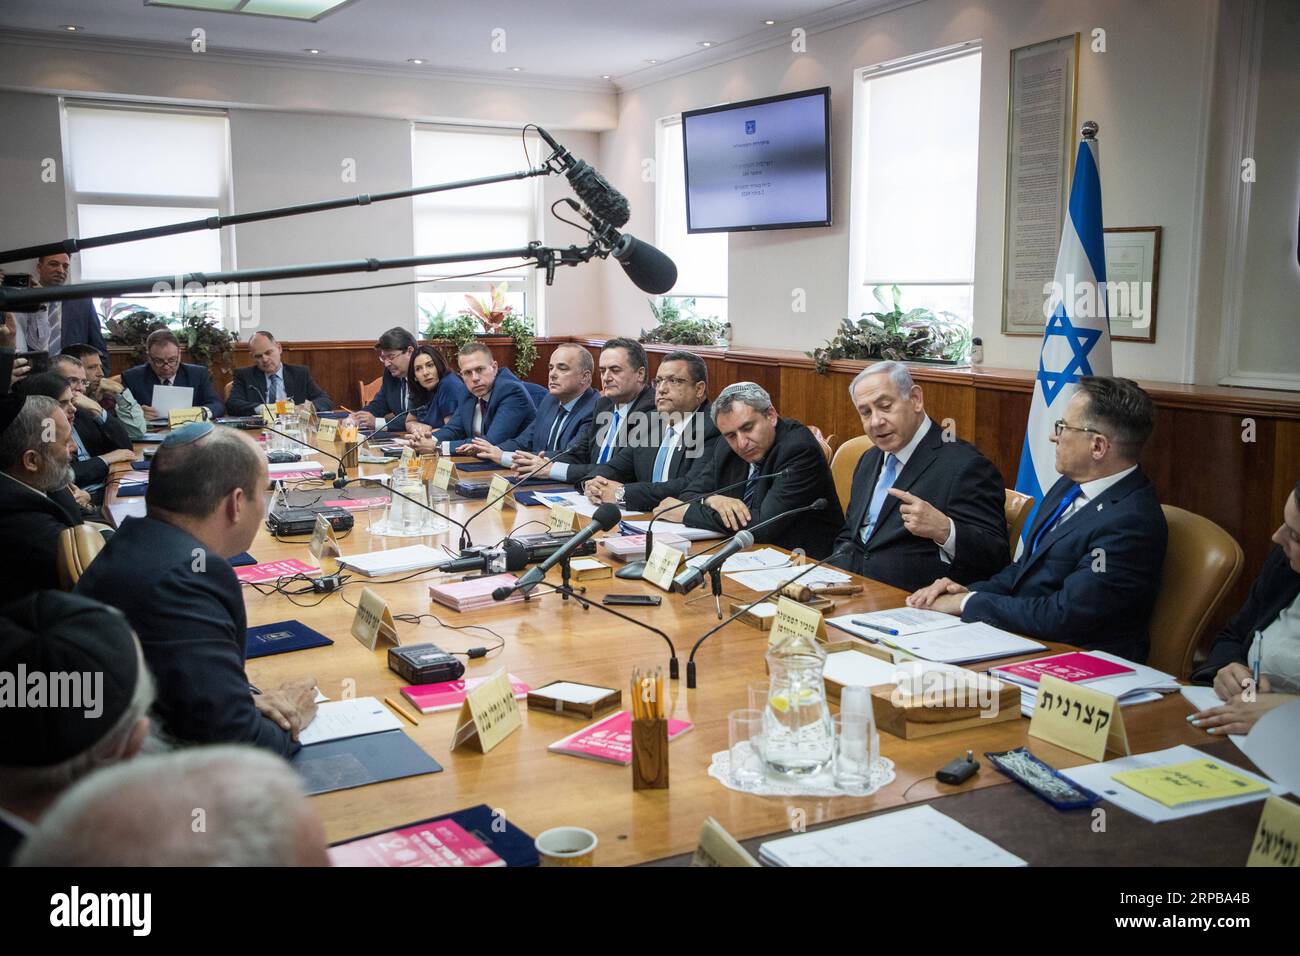 (190602) -- JERUSALEM, June 2, 2019 -- Israeli Prime Minister Benjamin Netanyahu (2nd R) attends the weekly cabinet meeting in Jerusalem, June 2, 2019. The Israeli parliament, known as the Knesset, dissolved itself last Wednesday and scheduled another general election for mid-September of this year. The development came after Israeli Prime Minister Benjamin Netanyahu failed to form a coalition government. JINI/Yonatan Sindel) MIDEAST-JERUSALEM-CABINET MEETING guoyu PUBLICATIONxNOTxINxCHN Stock Photo